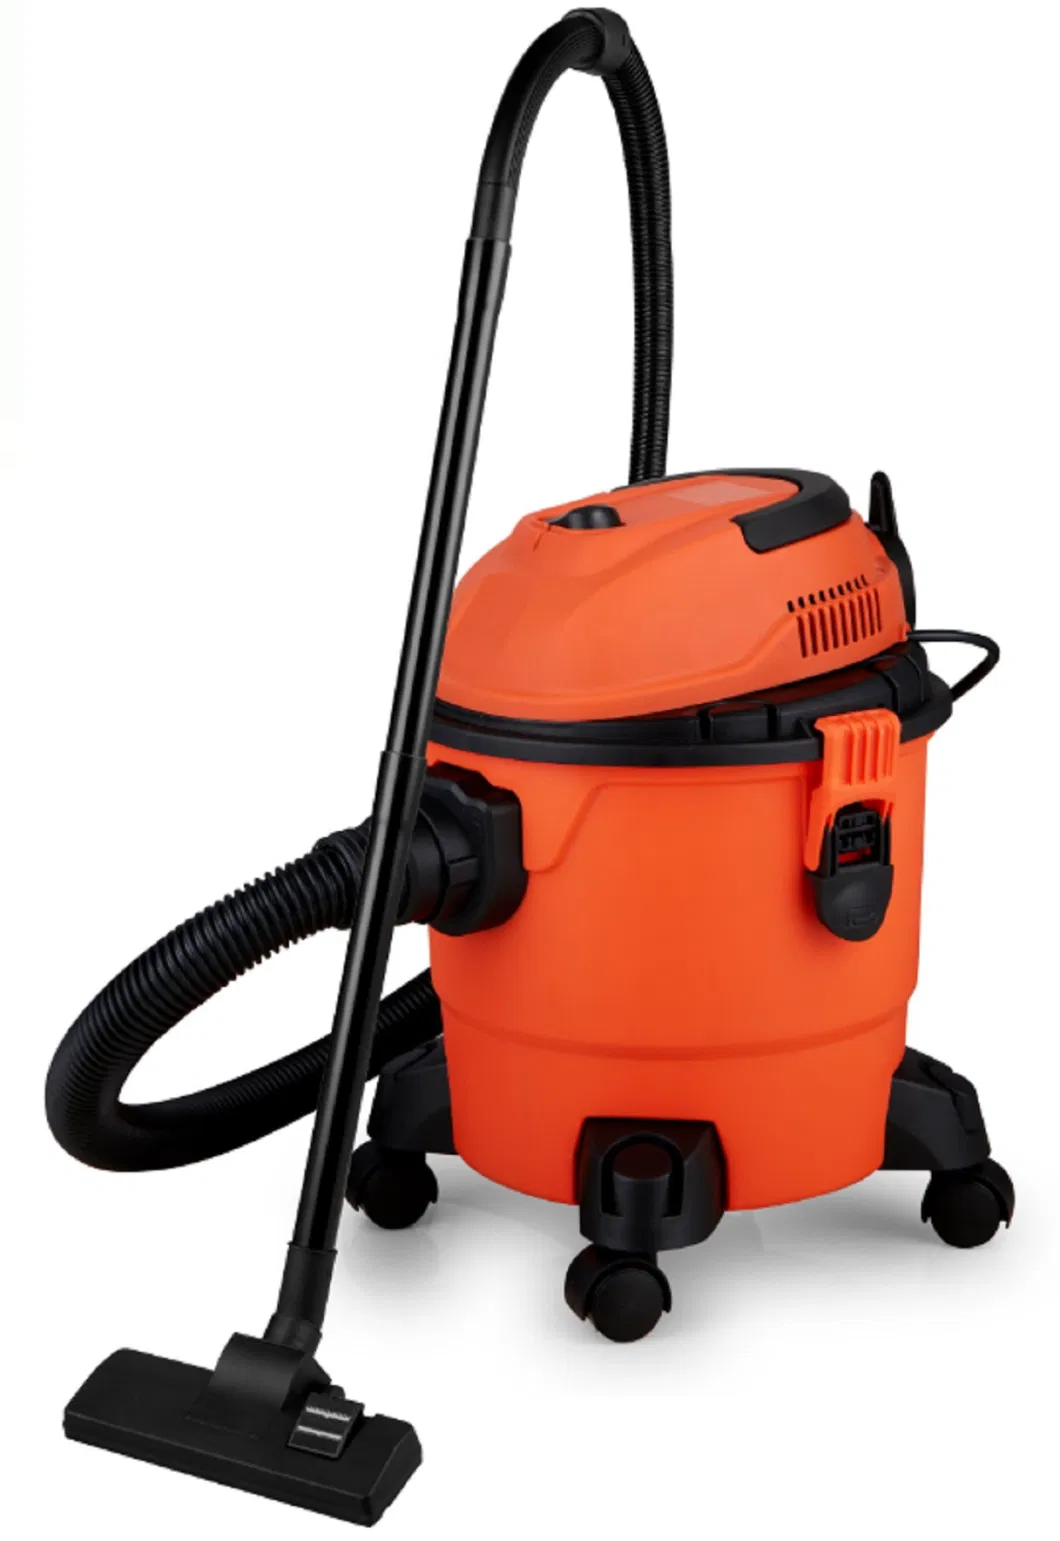 2022 Household-Super Convenient-Powerful-Electric Power-Tool Machines-Vacuum Cleaner